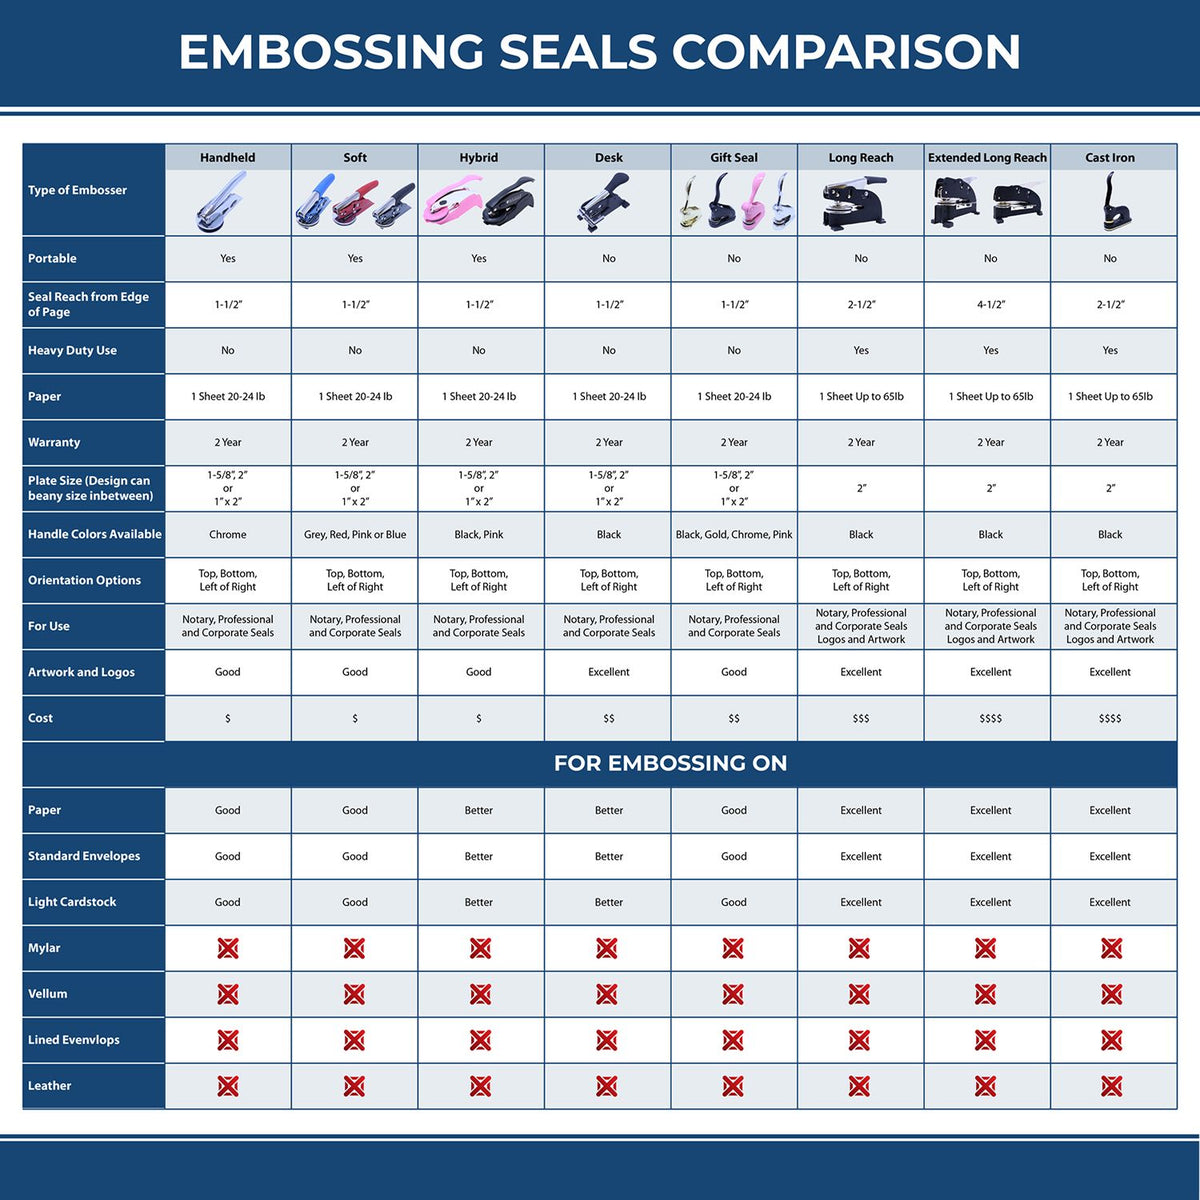 A comparison chart for the different types of mount models available for the Heavy Duty Cast Iron North Carolina Geologist Seal Embosser